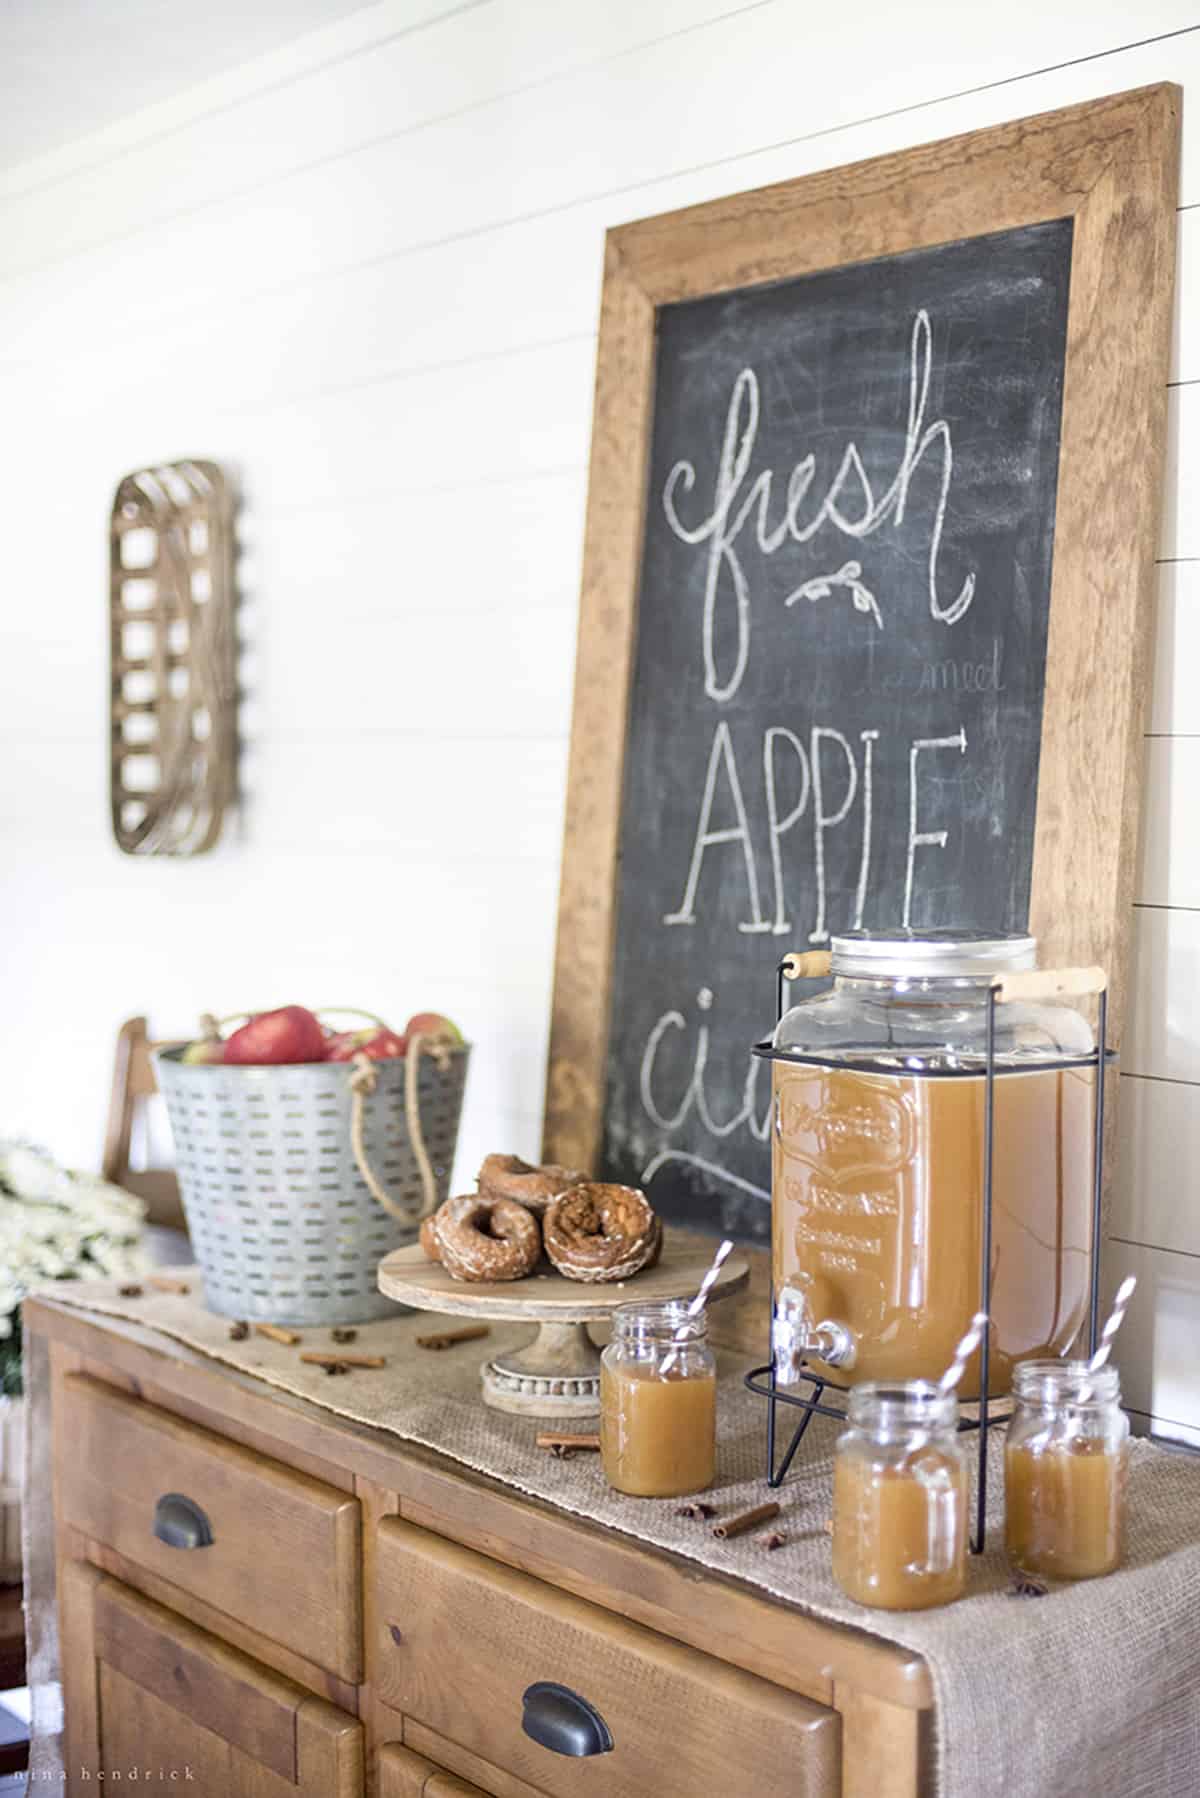 An Apple Cider Bar on a wooden stand with burlap tablecloth, beverage dispenser, plate of donuts, and a chalkboard that says "Fresh Apple Cider".